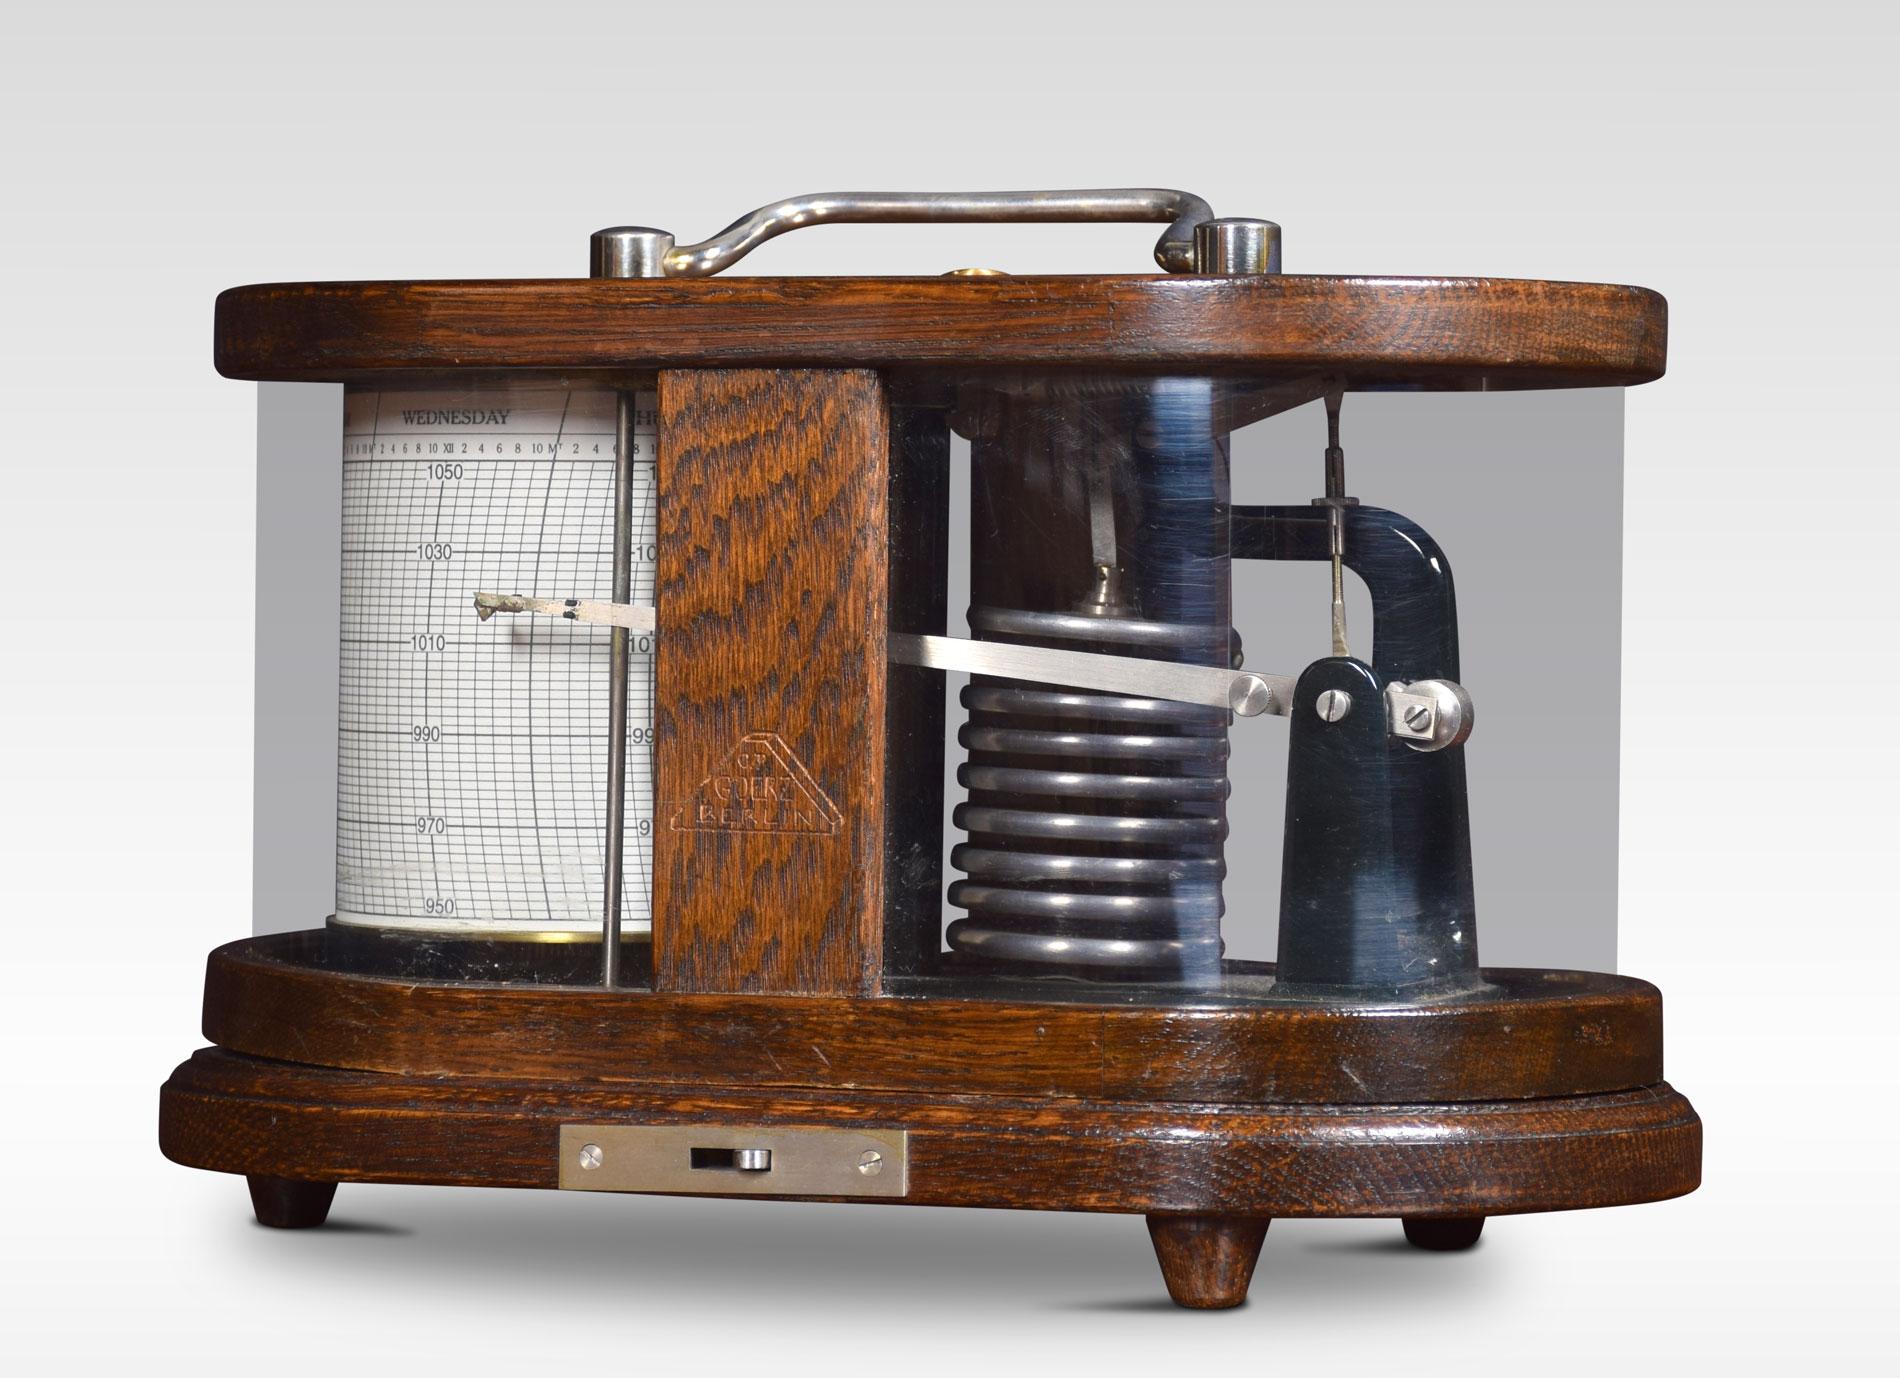 Art Deco barograph by C P Goerz. The oak and plated metal Barograph encase with rounded ends. The mechanical eight-day movement is housed in the drum, fitted with a seven-day chart which covers one full rotation of the drum. The ink trace, or